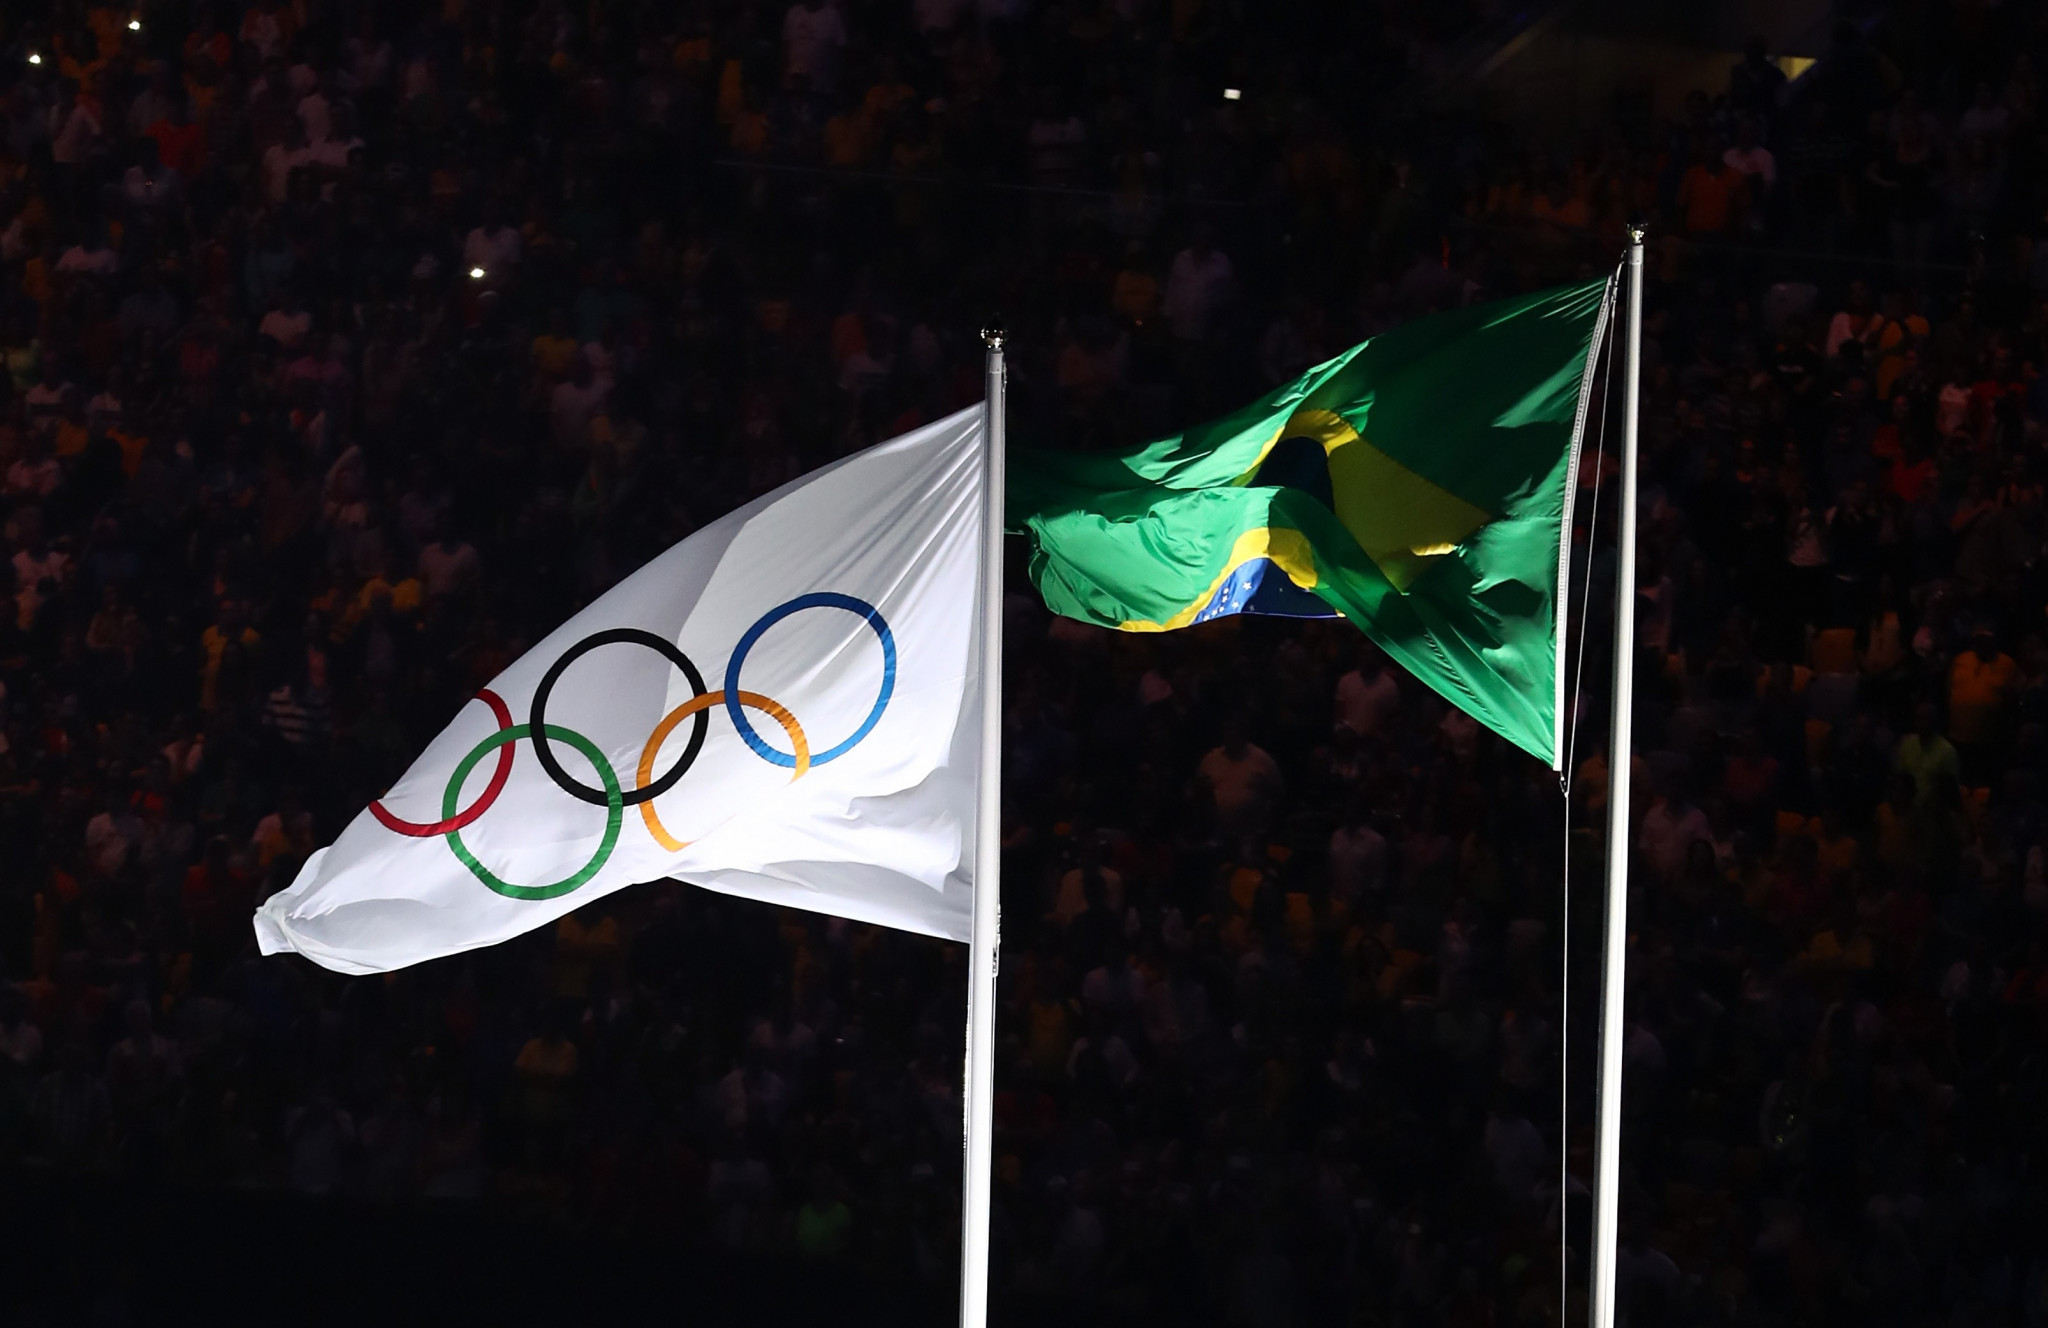 The Brazilian Olympic Committee has refuted suggestions its emergency funding was politically motivated ©Getty Images